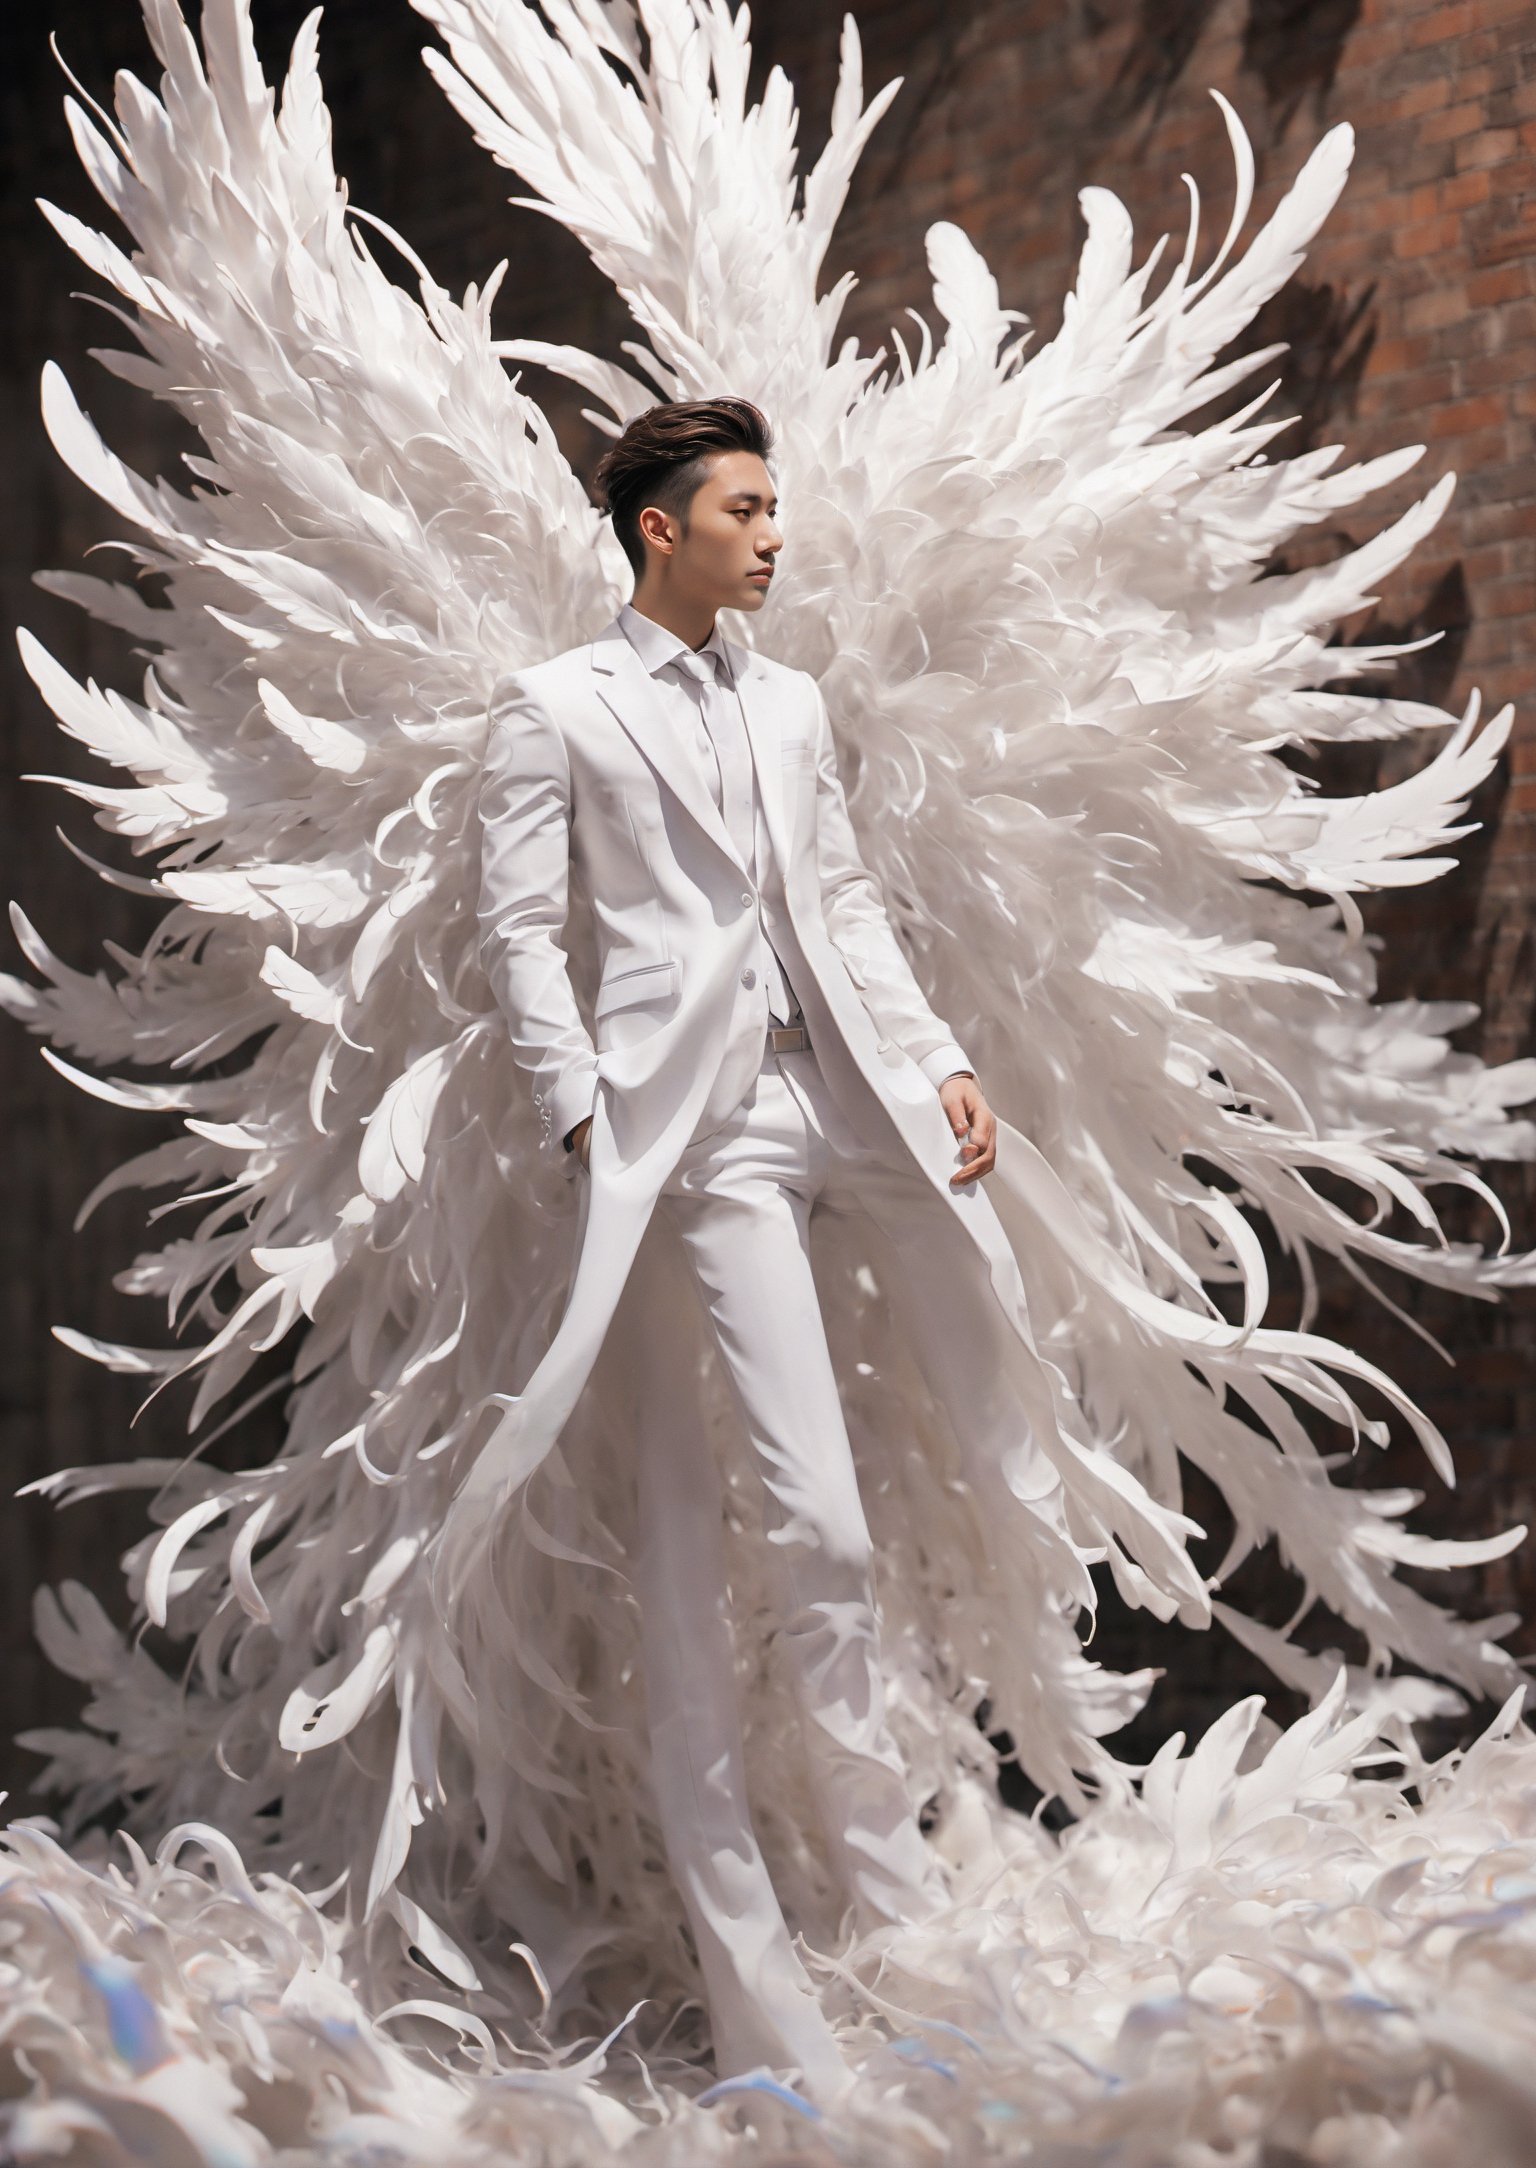 Create an image of a young man wearing a suit, featuring vibrant, white wings extending from his back. Random movement The background should be plain white, emphasizing the contrast and detailing of the beauty wings and the sharpness of the suit. The man should appear poised and elegant, with the wings unfurled to showcase a spectrum of vivid hues, blending seamlessly from one color to another. The focus should be on the meticulous details of the wings’ feathers and the suit’s fabric, capturing a harmonious blend of natural and refined elements, wings,Stylish, close up,l3min,xxmixgirl